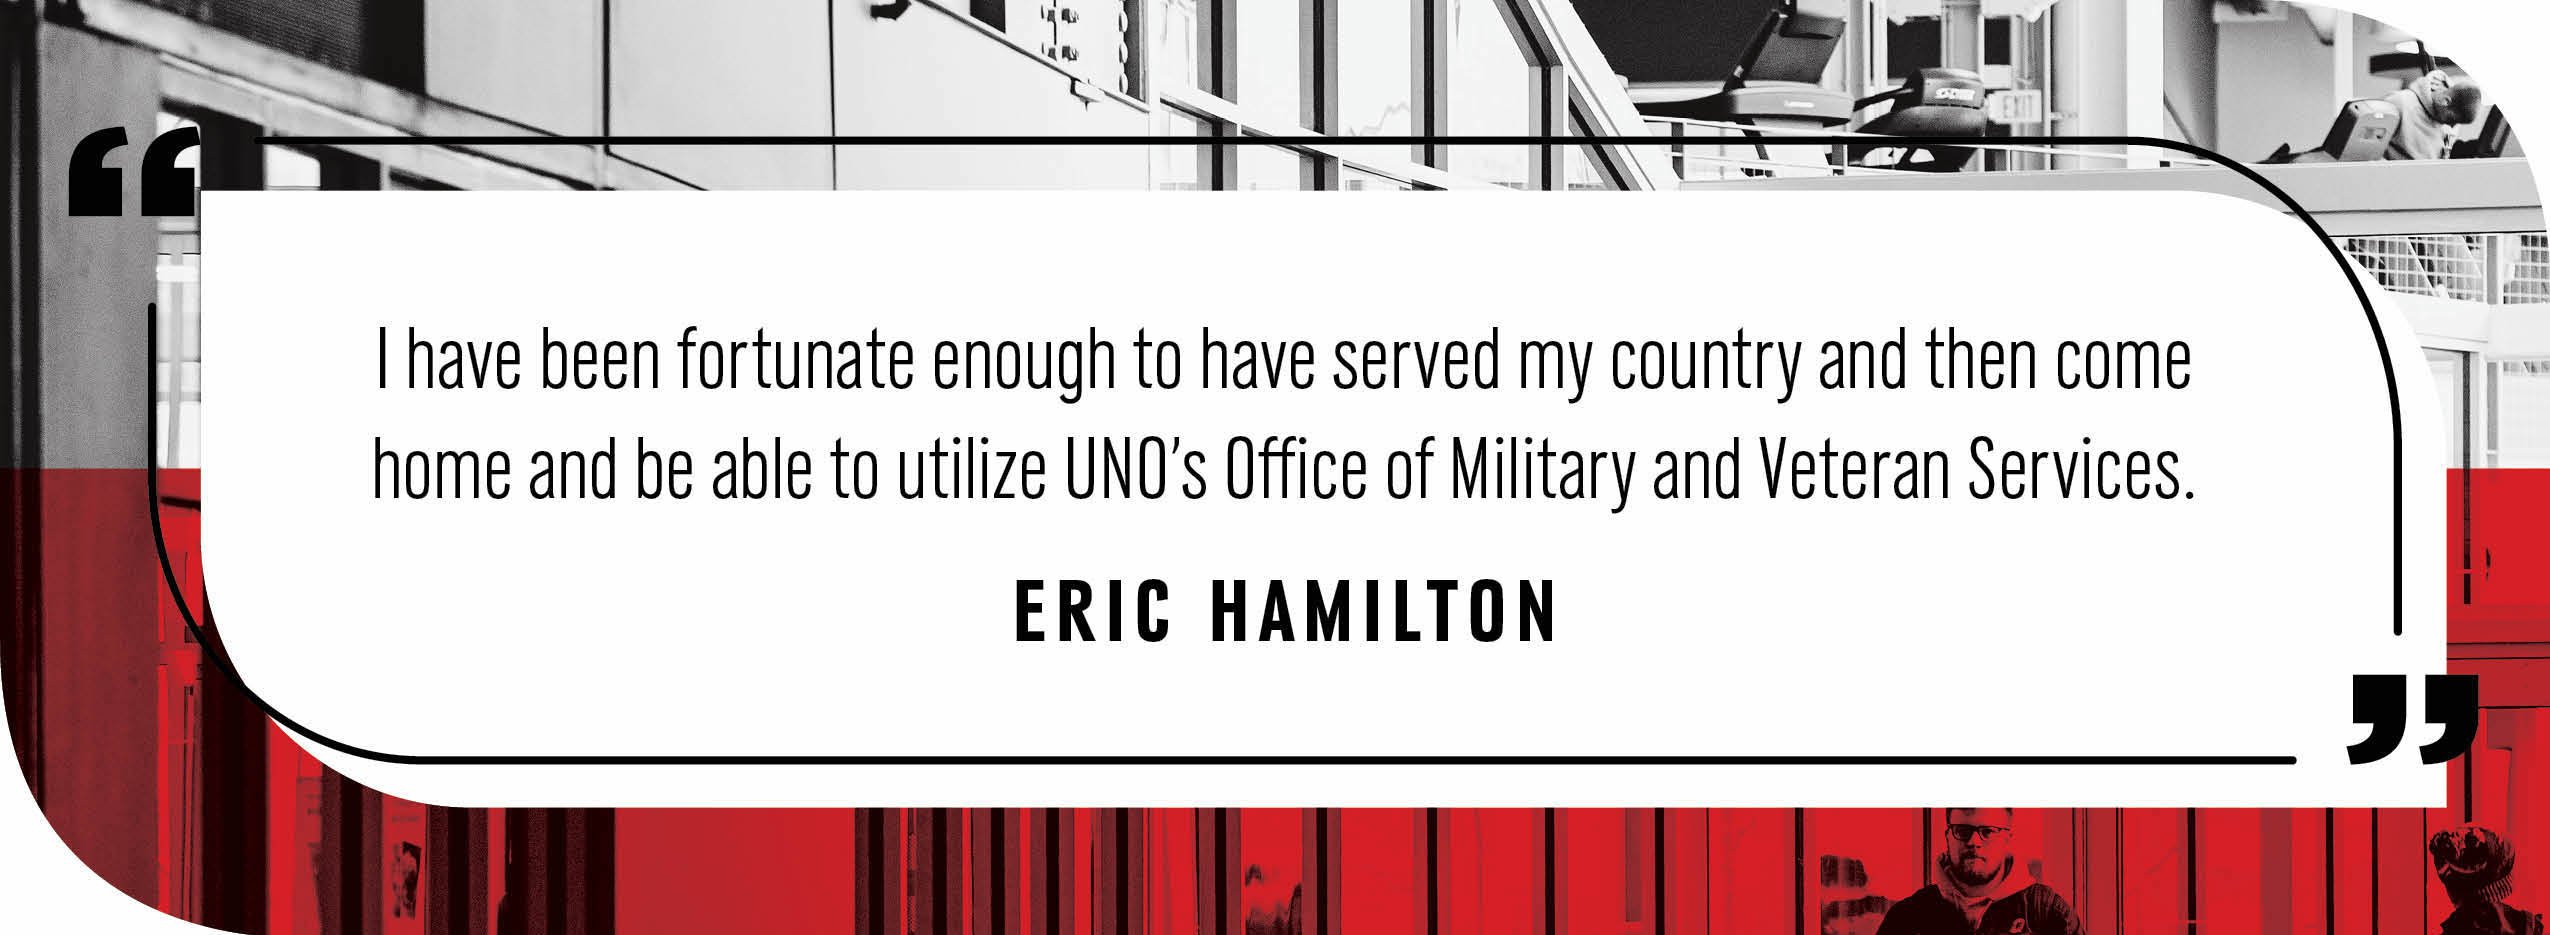 Quote by Eric Hamilton: "I have been fortunate enough to have served my country and then come home and be able to utilize UNO's Office of Military and Veteran Services."